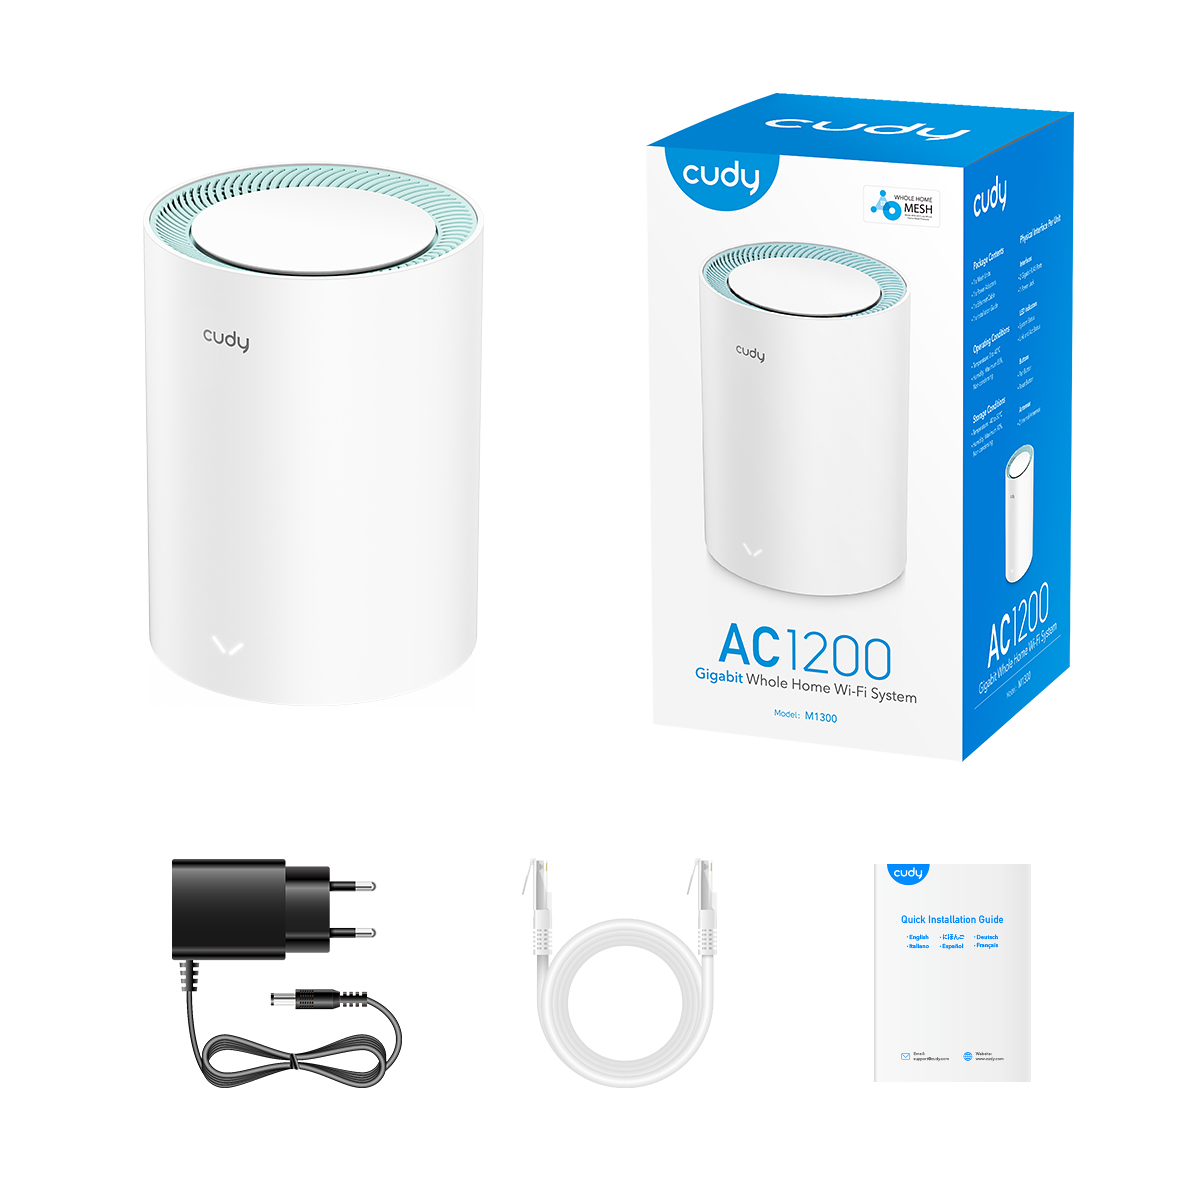 Système WiFi Cudy M1300 Mesh AC1200 Dual Band - 867 Mbps sur 5 GHz, 300 Mbps sur 2,4 GHz - 1x Port LAN 1000/100/10 Mbps, 1x Port WAN 1000/100/10 Mbps - 2 Antennes Internes